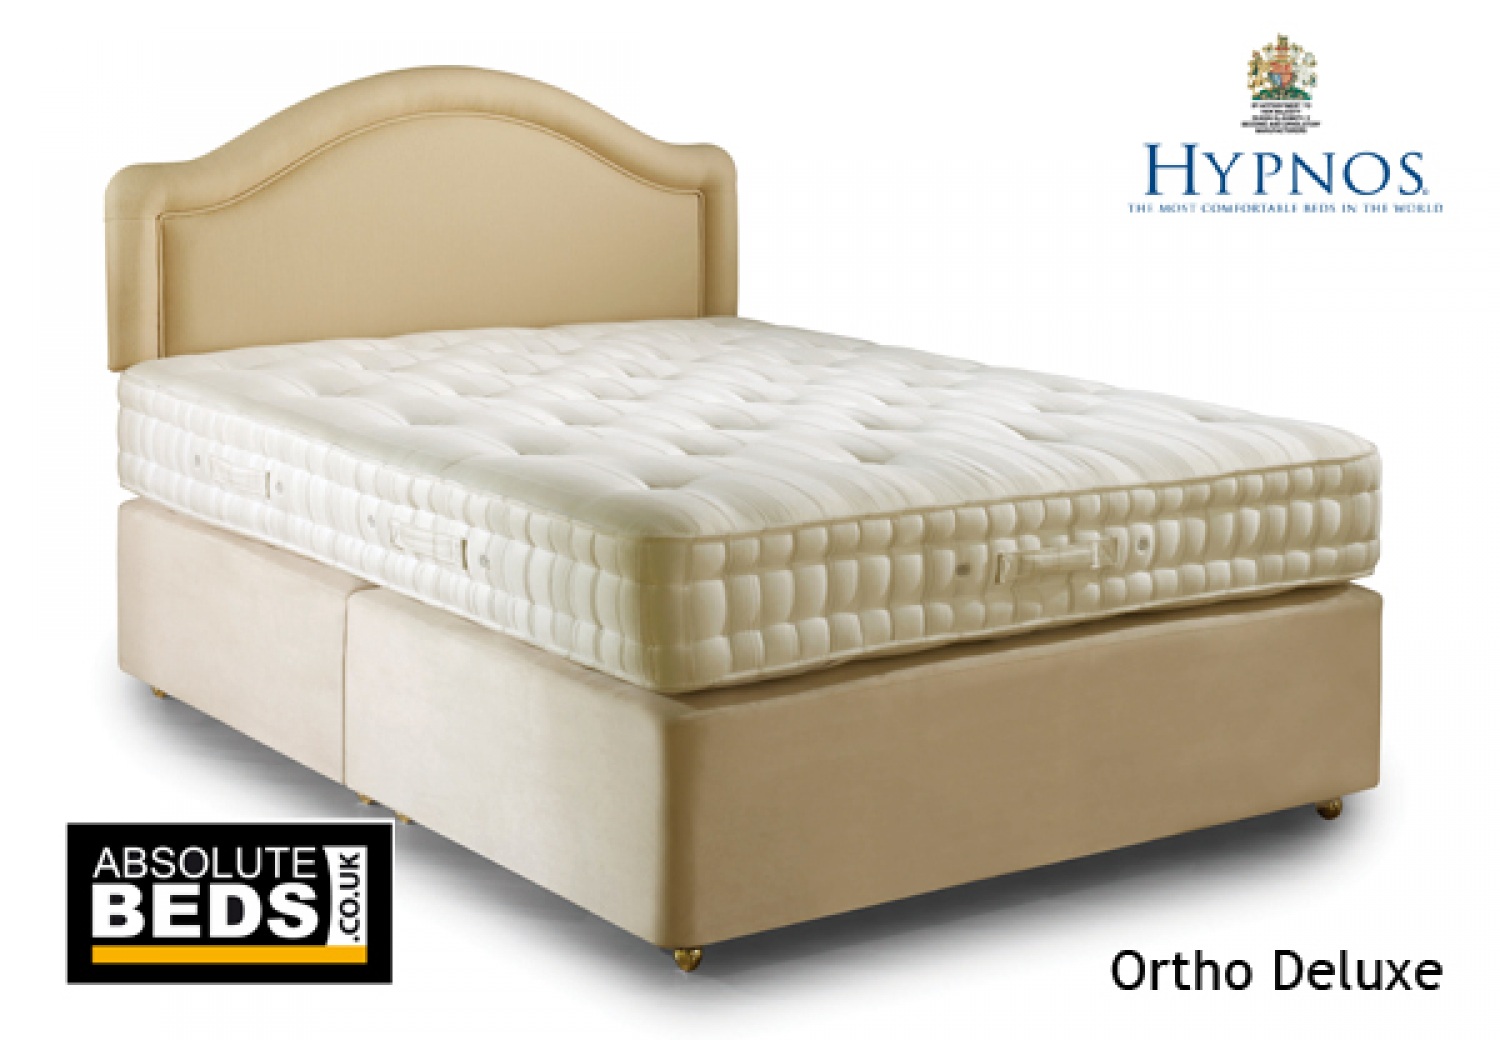 Hypnos Ortho Deluxe 1100 Pocket Sprung Mattress image